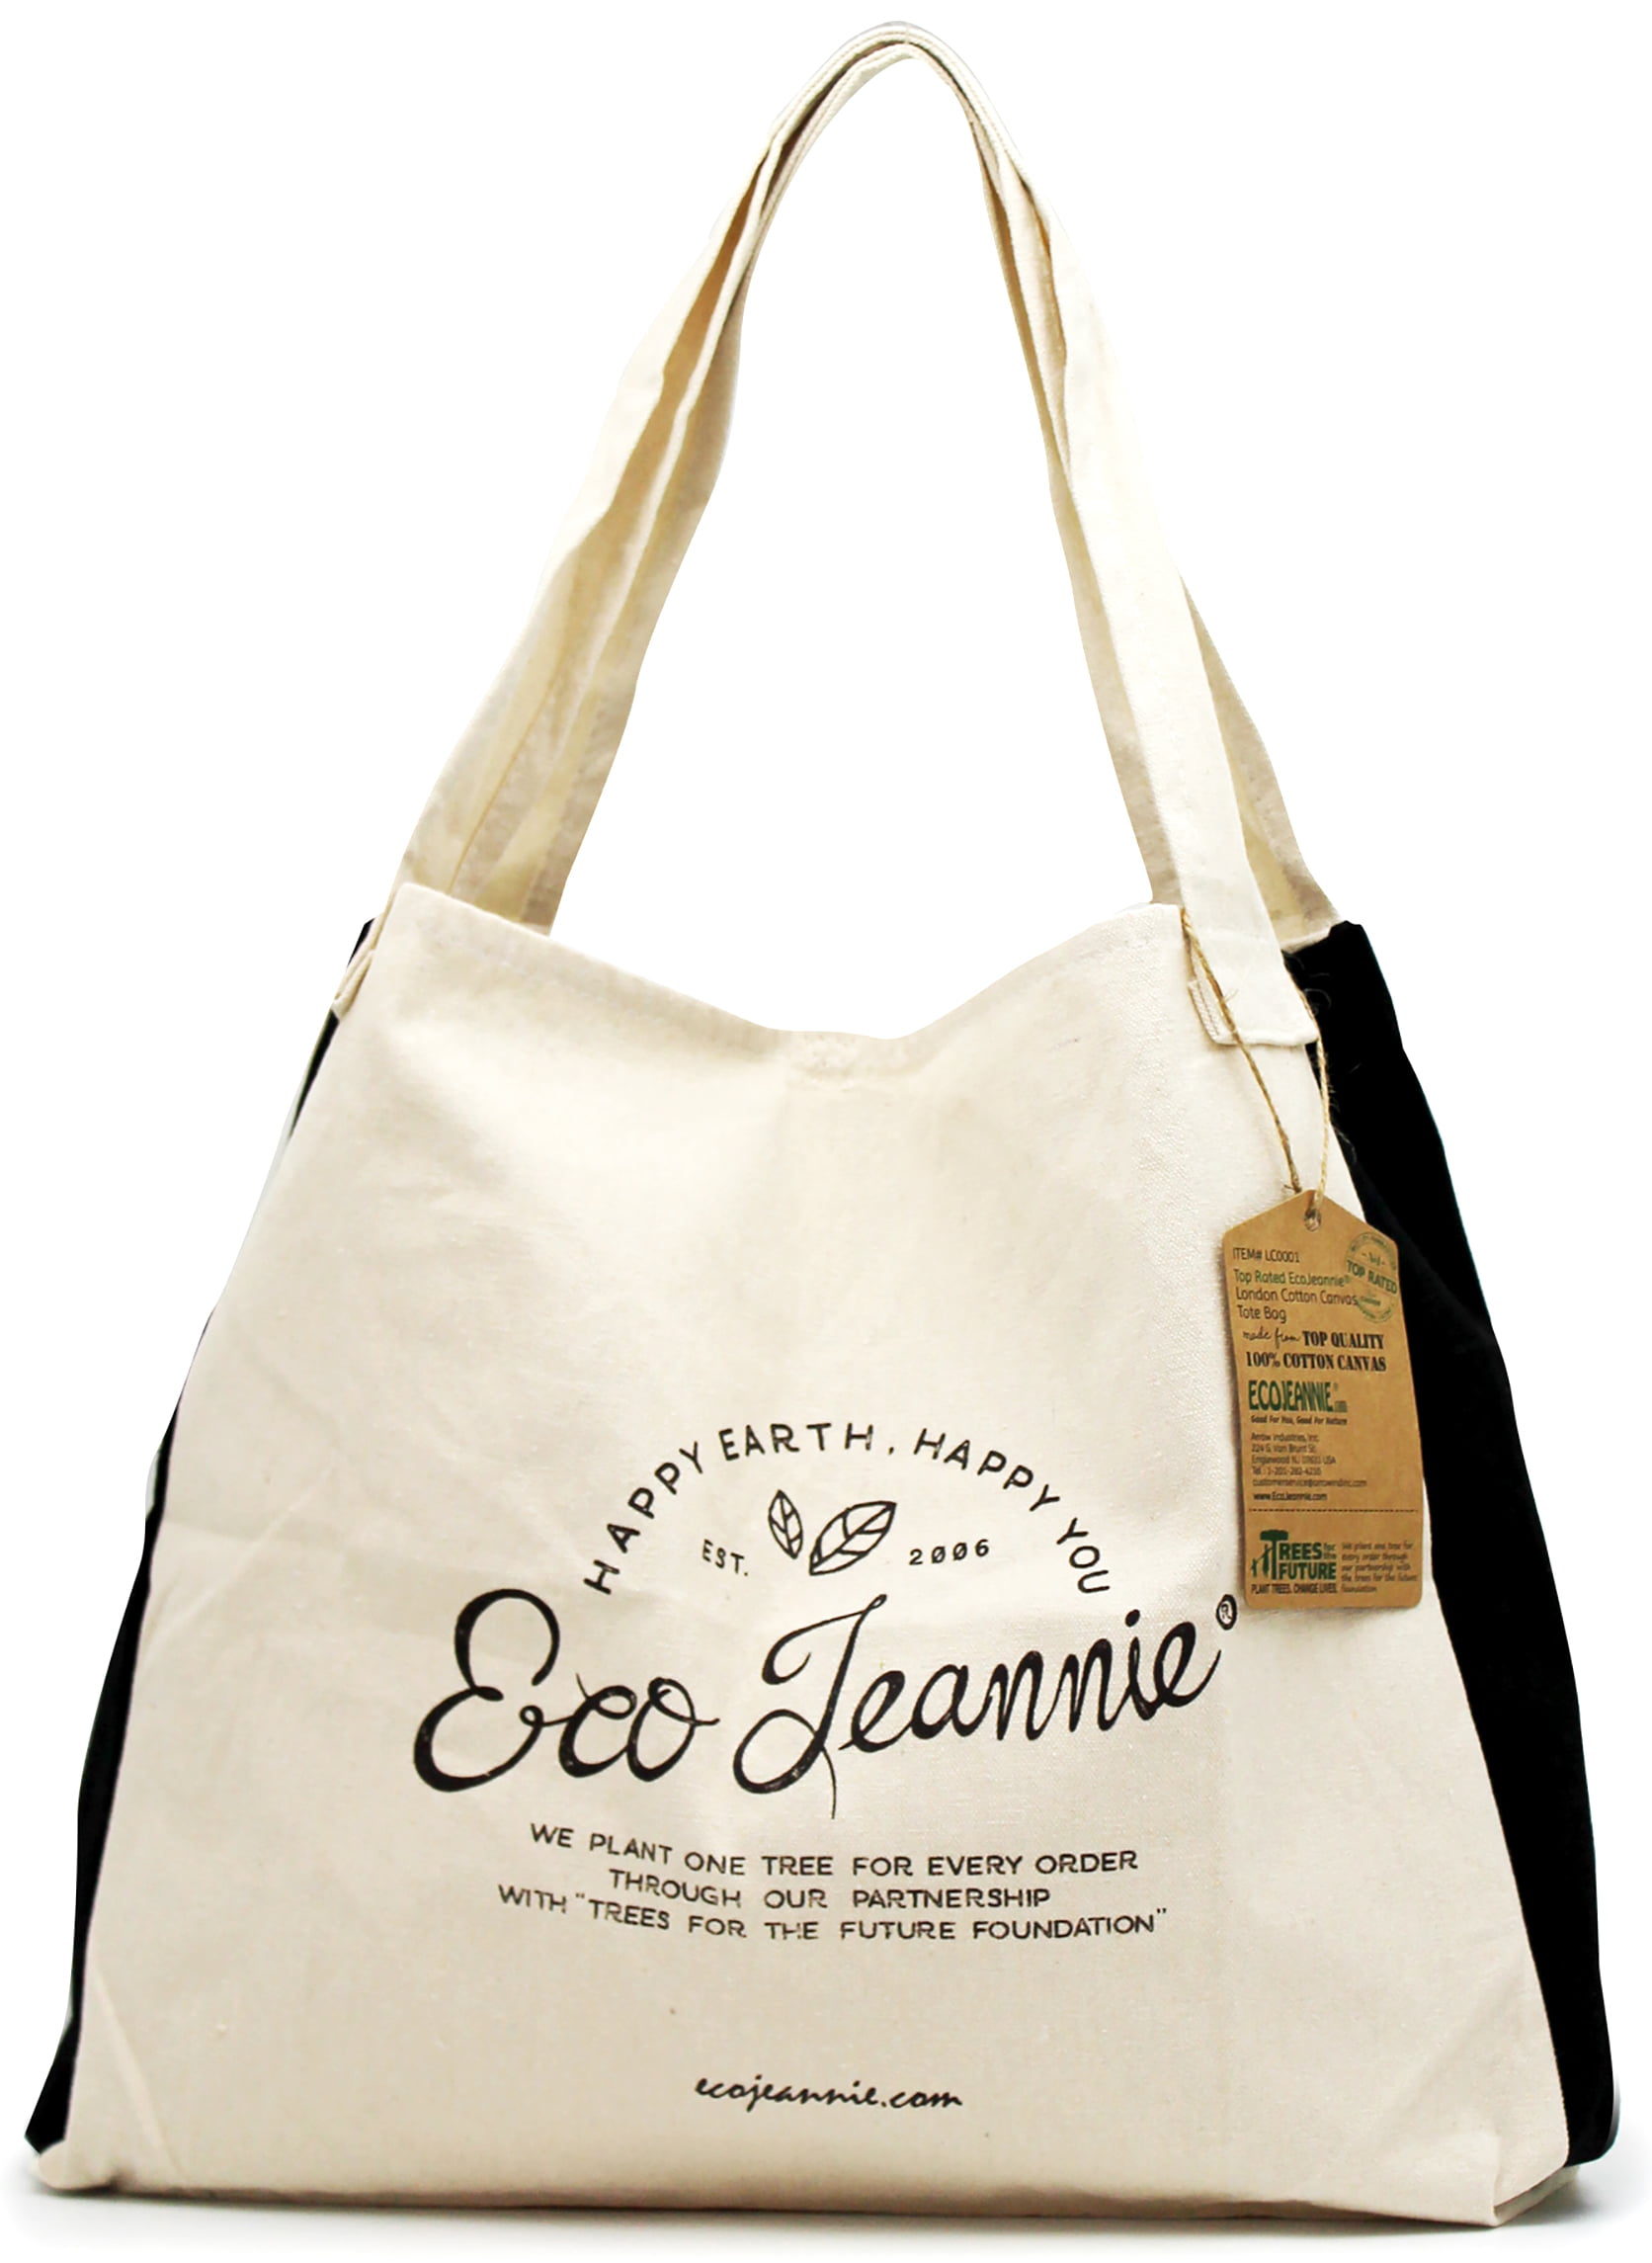 EcoJeannie Organic 100% Cotton Canvas Reusable Tote Bag lightweight and portable 